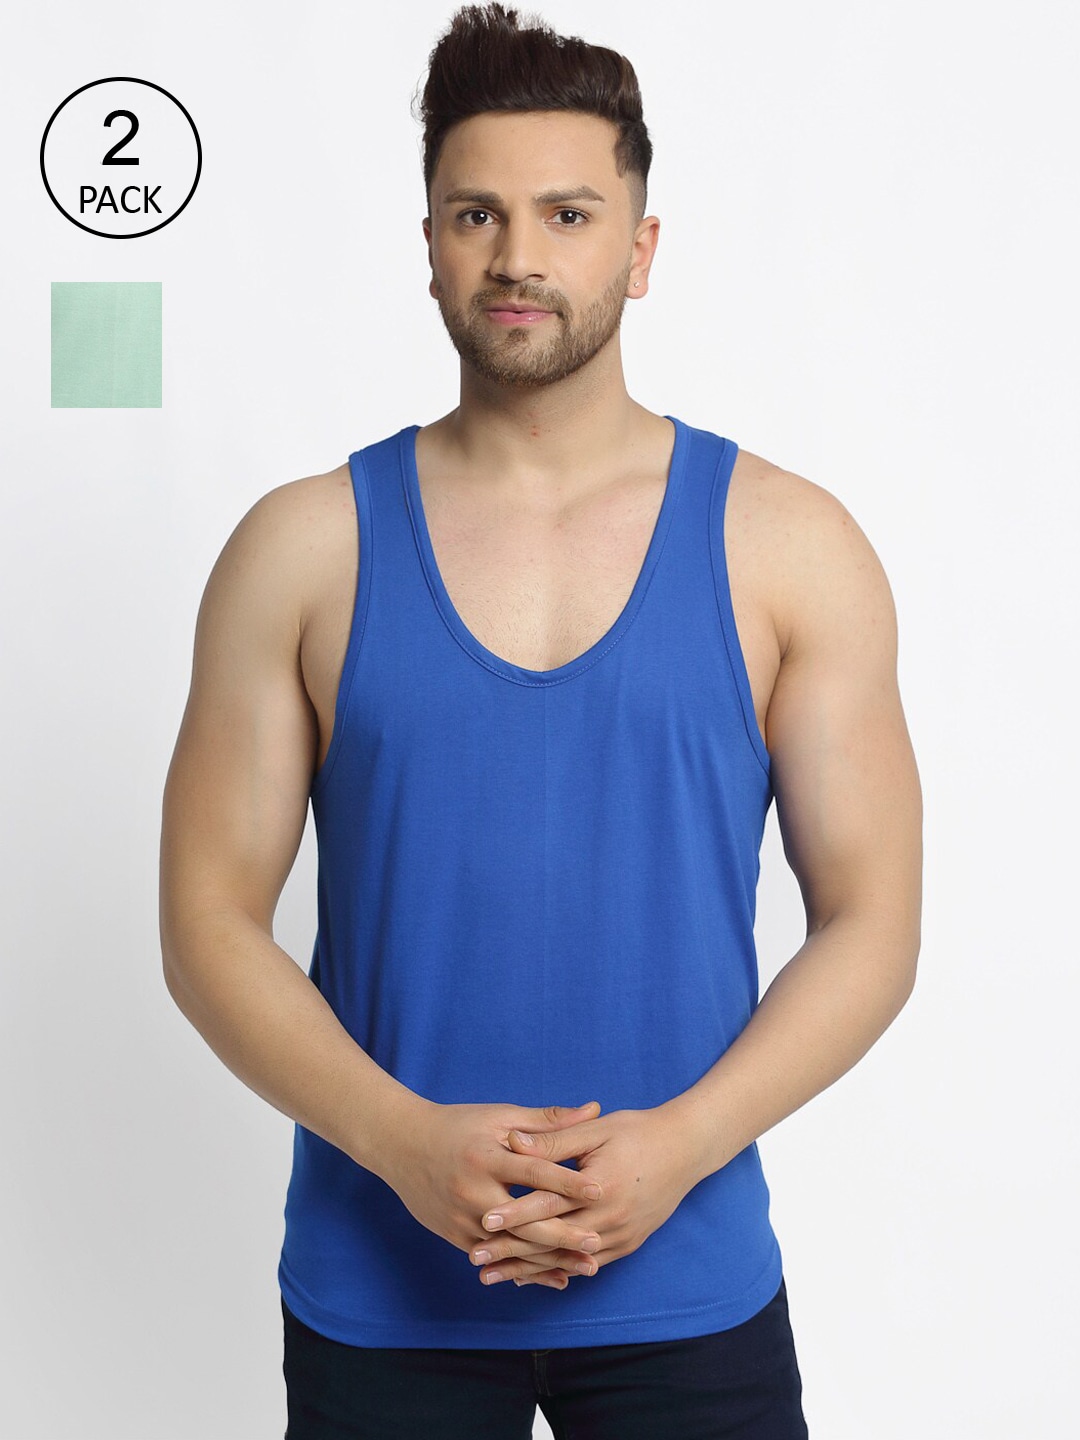 Clothing Innerwear Vests | Friskers Men Pack Of 2 Blue and Sea Green Solid Pure Cotton Gym Vests - KW53854